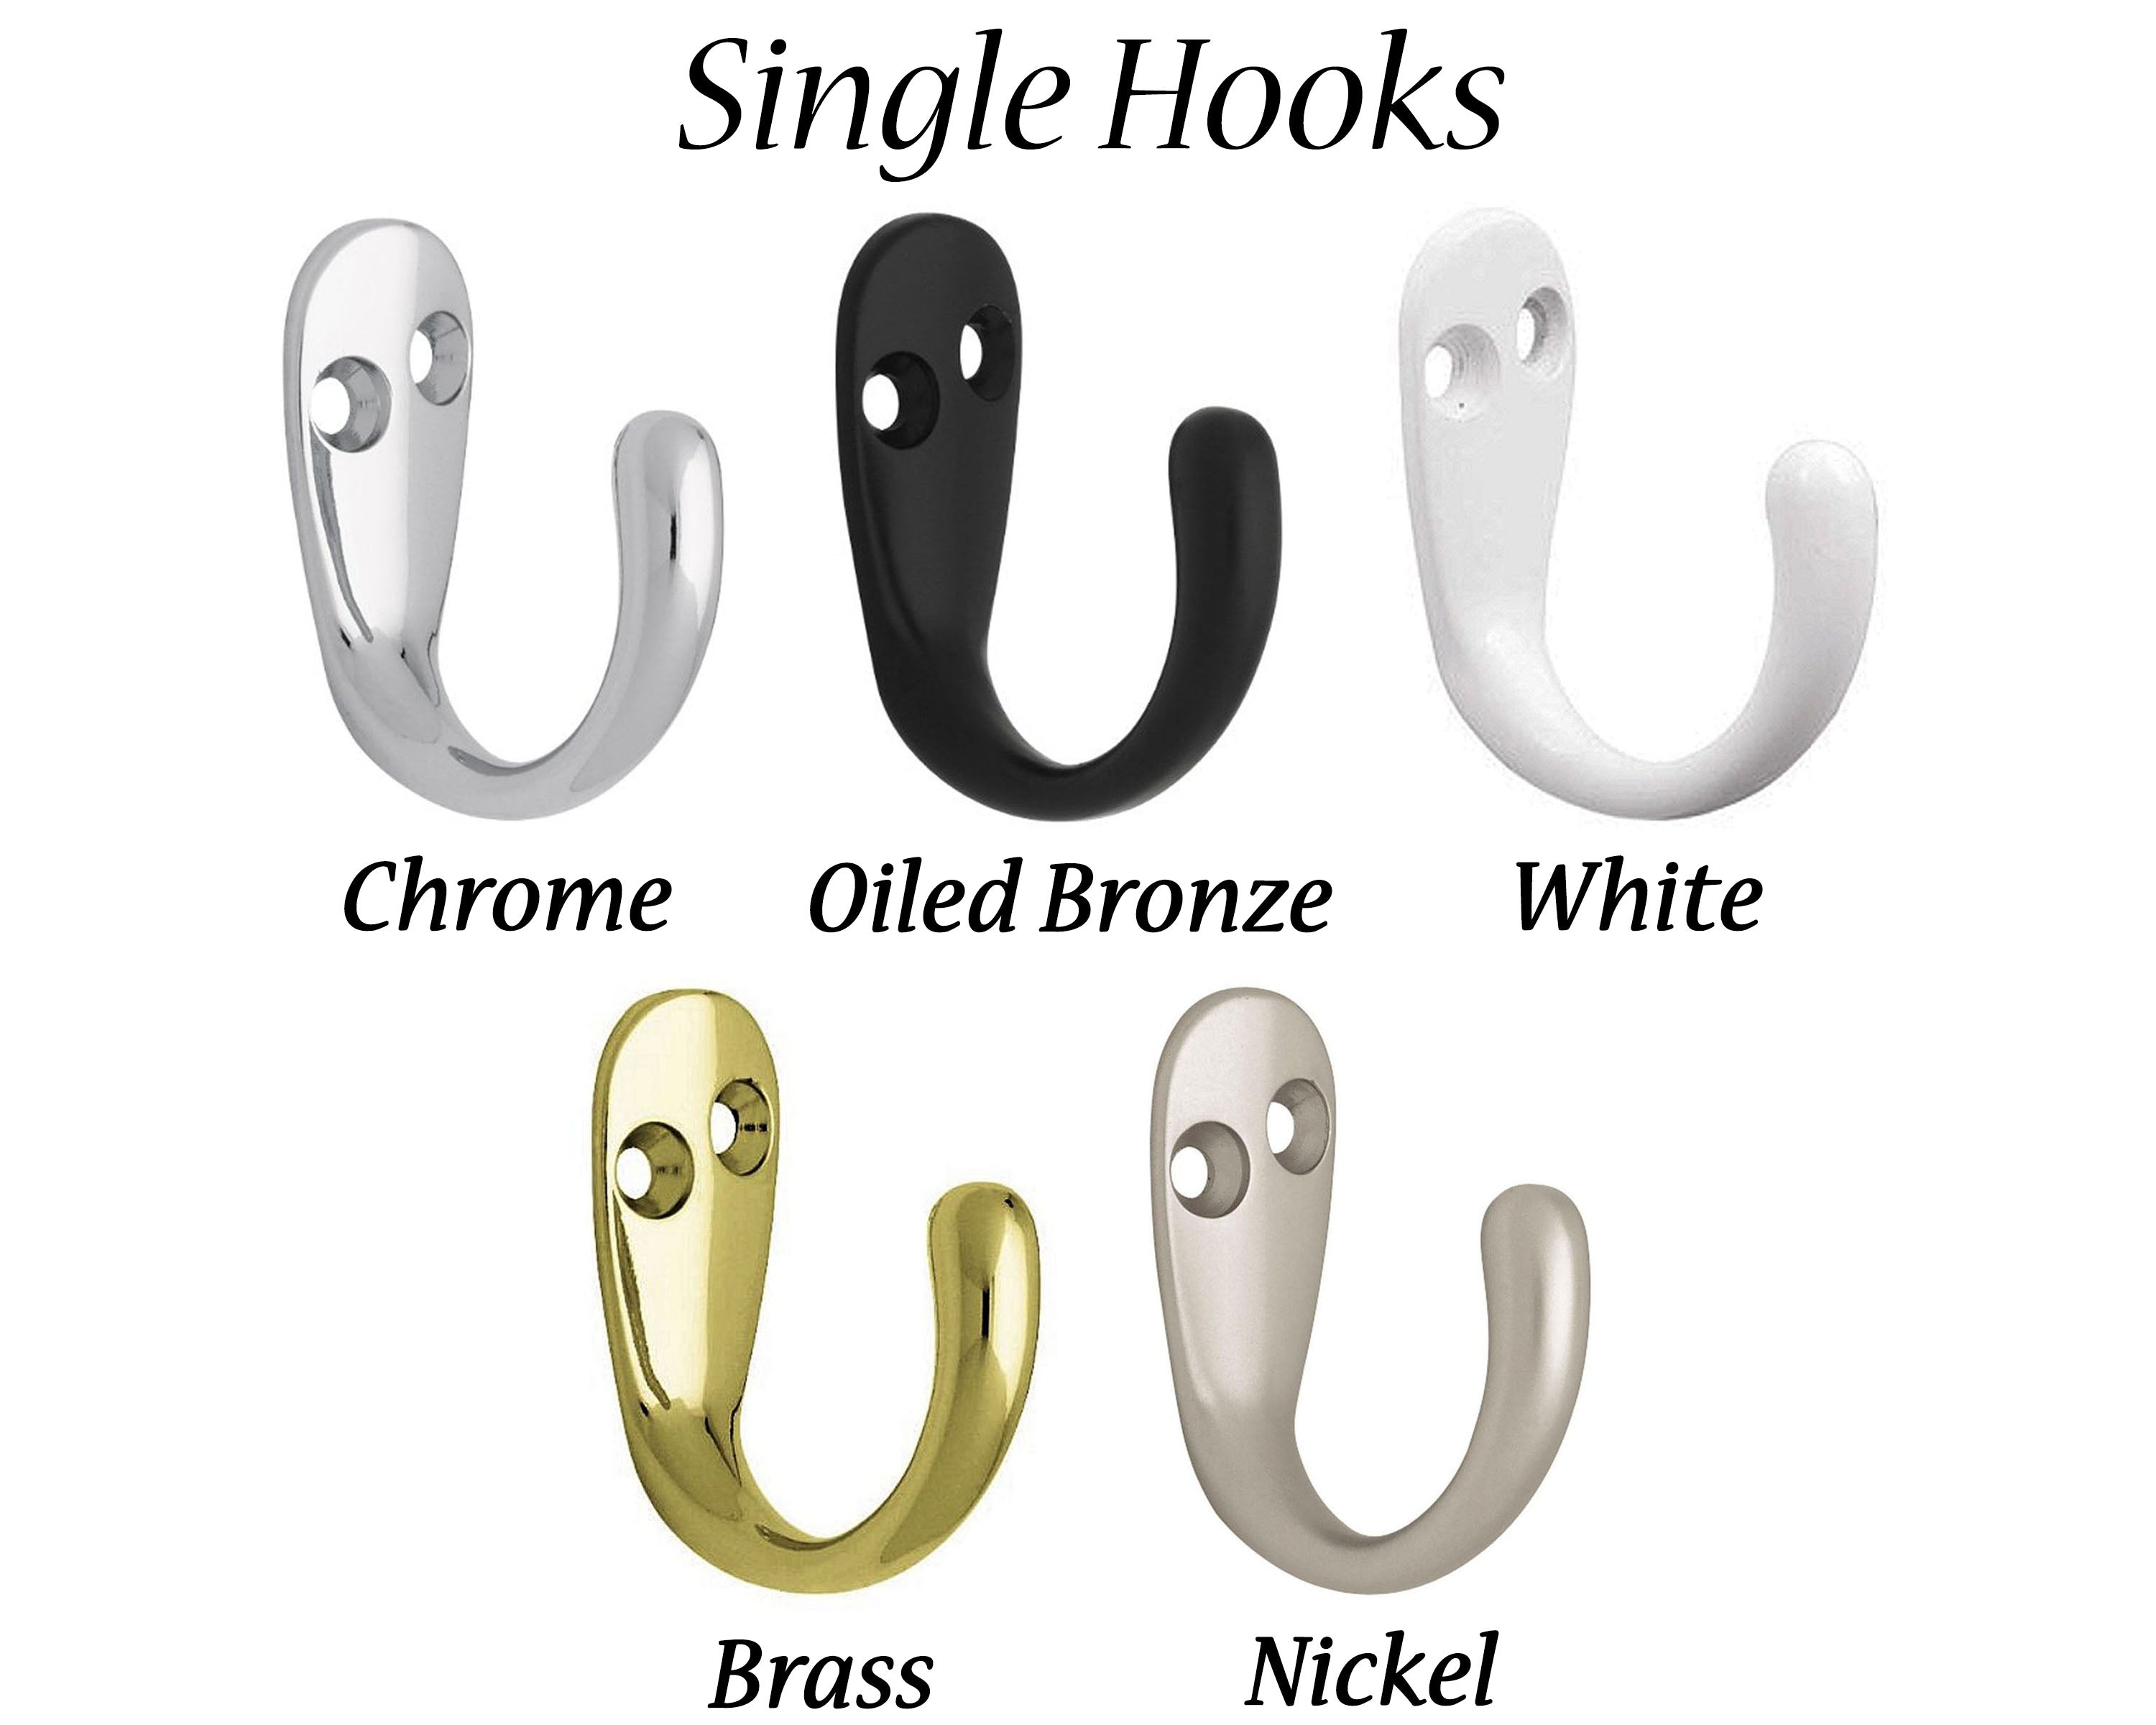 Singel Hook Finishes Oiled Bronze, Nickel, Chrome, Brass and White